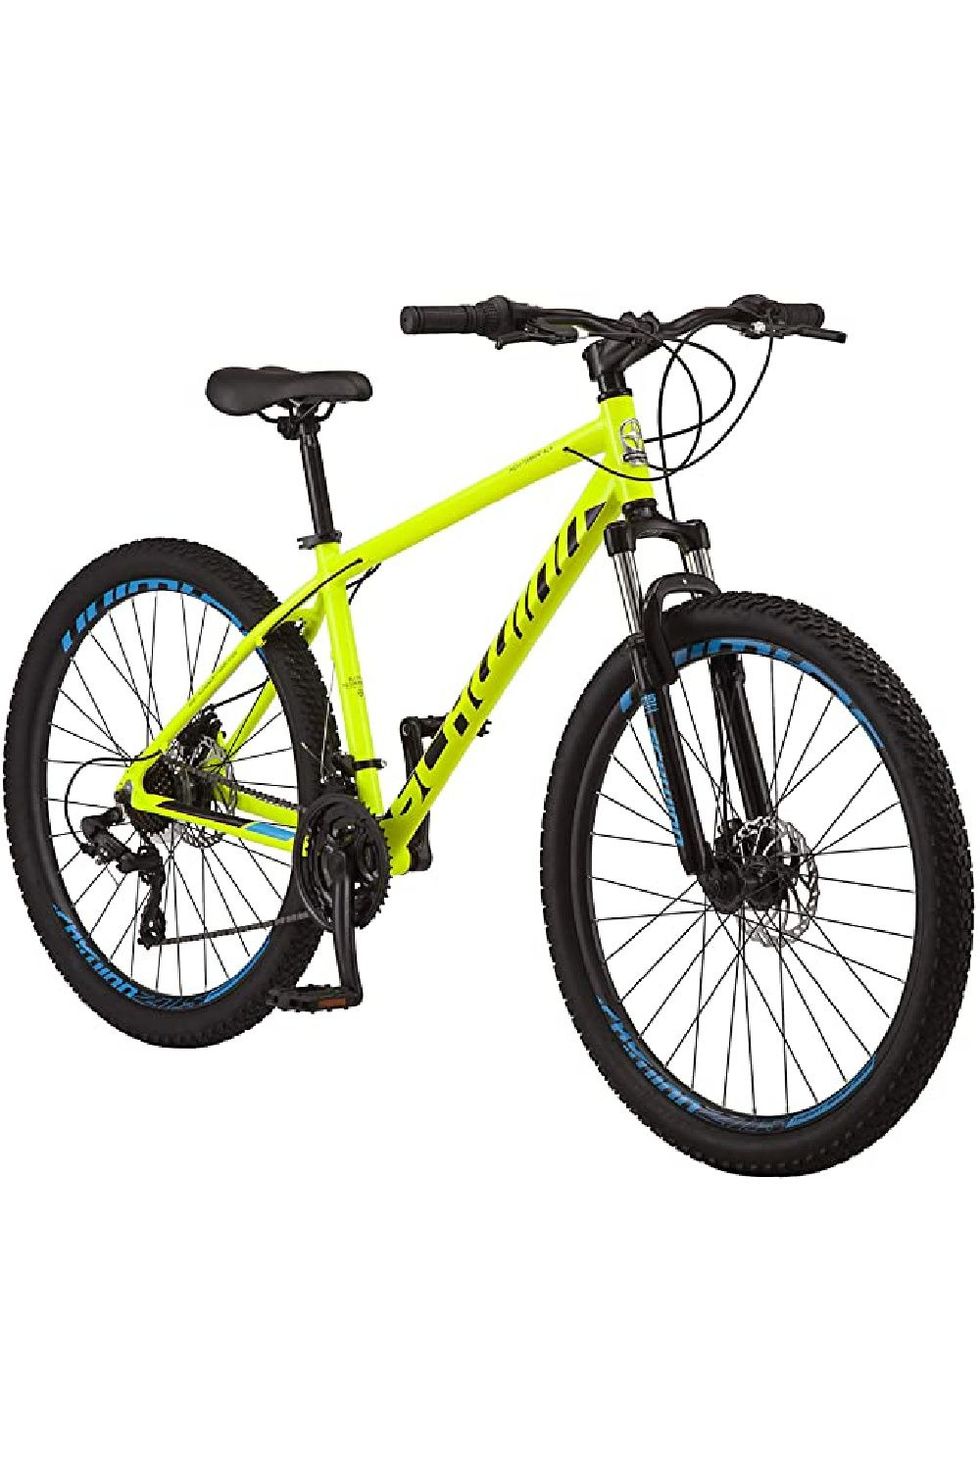 High Timber Youth/Adult Mountain Bike